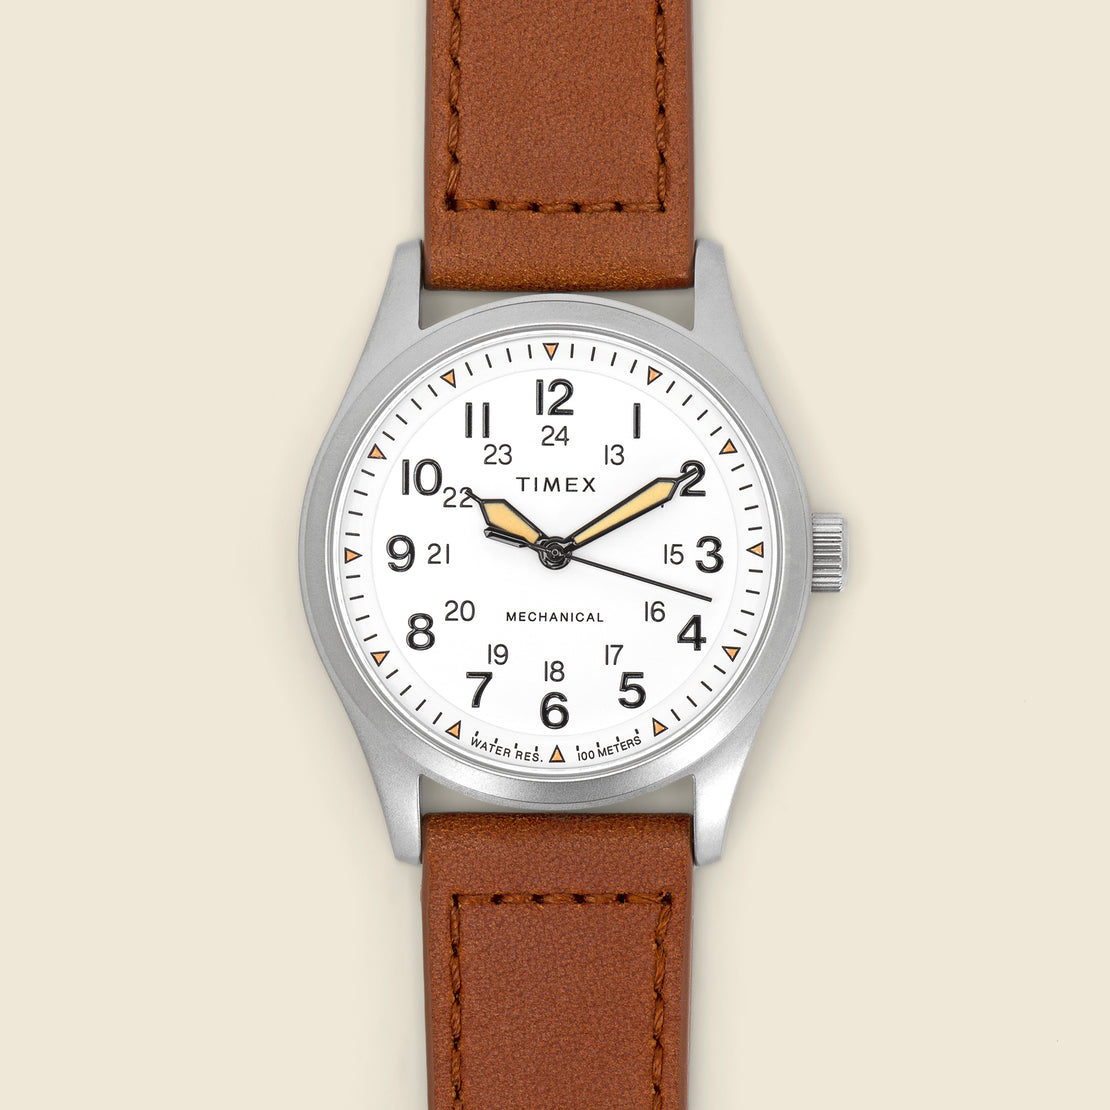 Timex Expedition North Field Post Mechanical Watch 38mm - White/Brown Leather